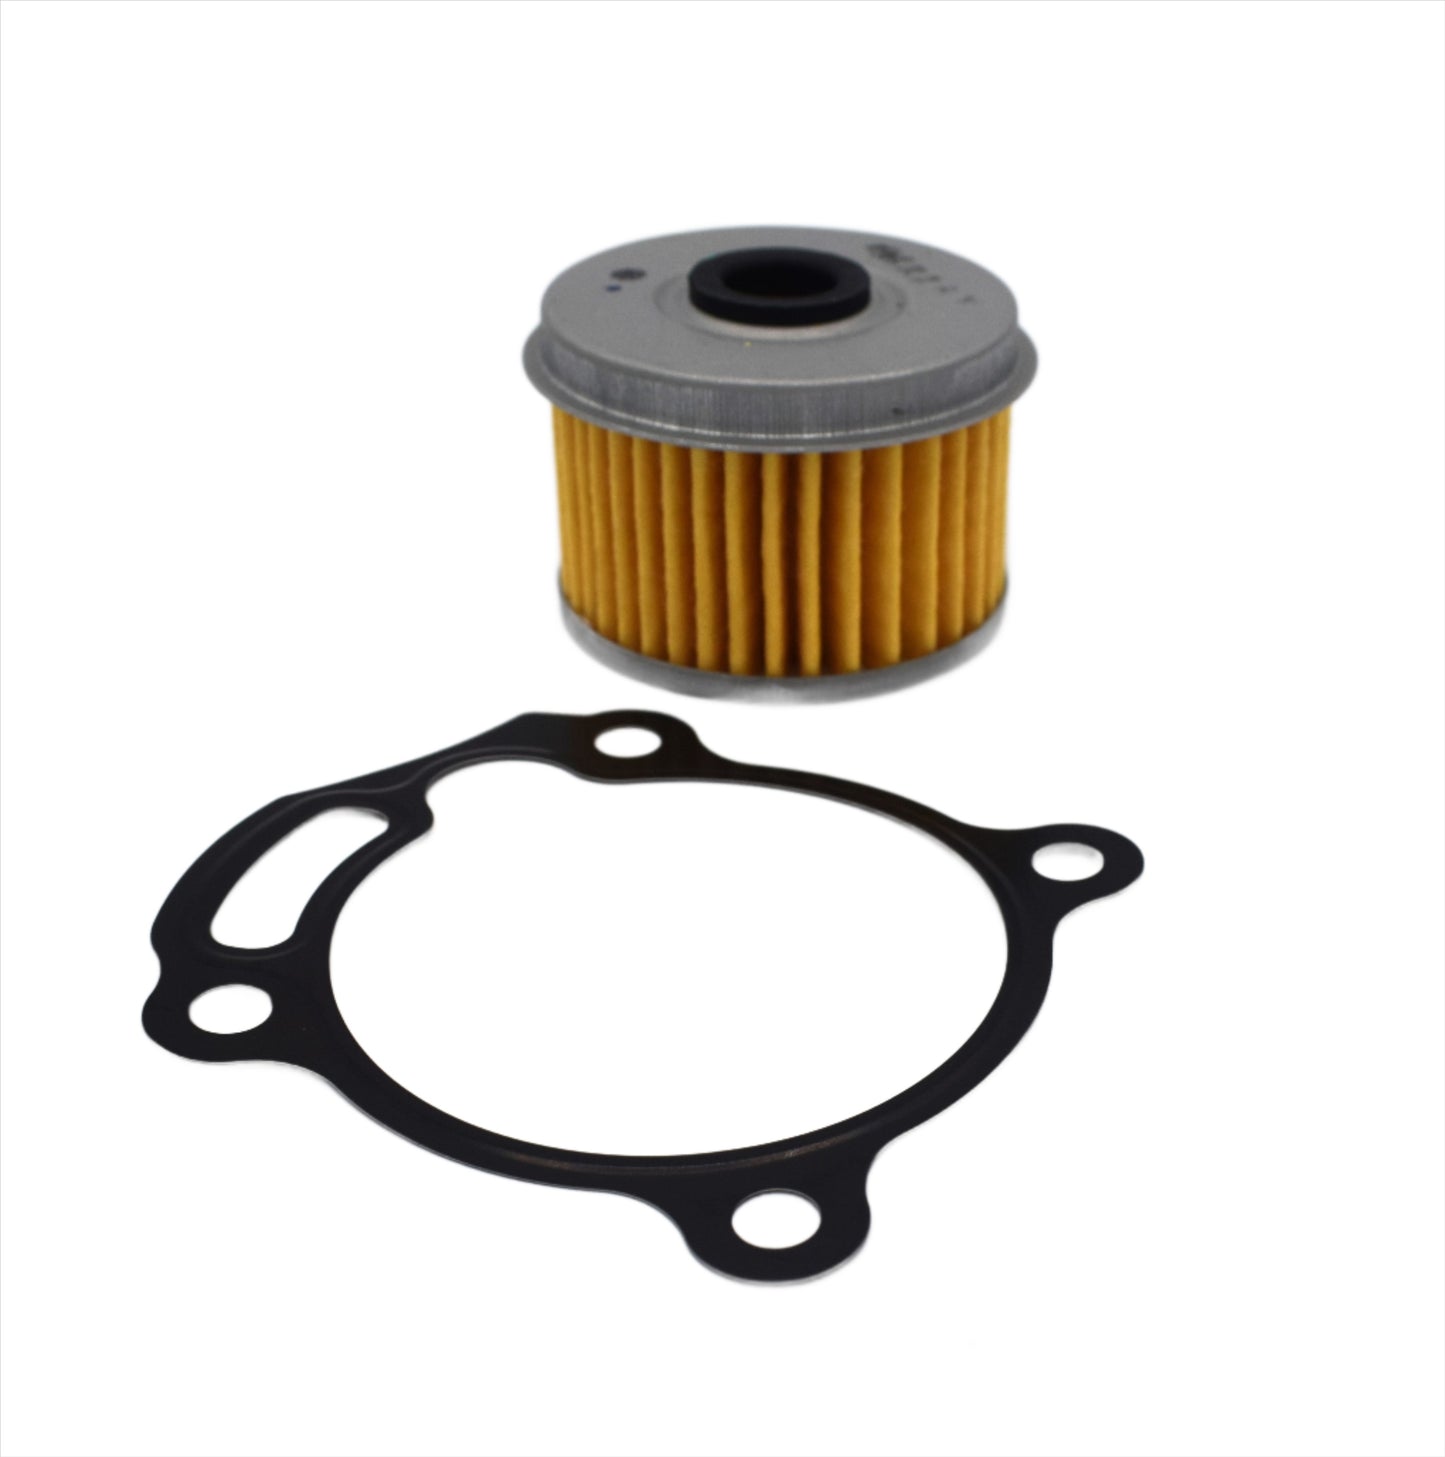 CRF300L/RALLY OIL FILTER, DRAIN WASHER & GASKET